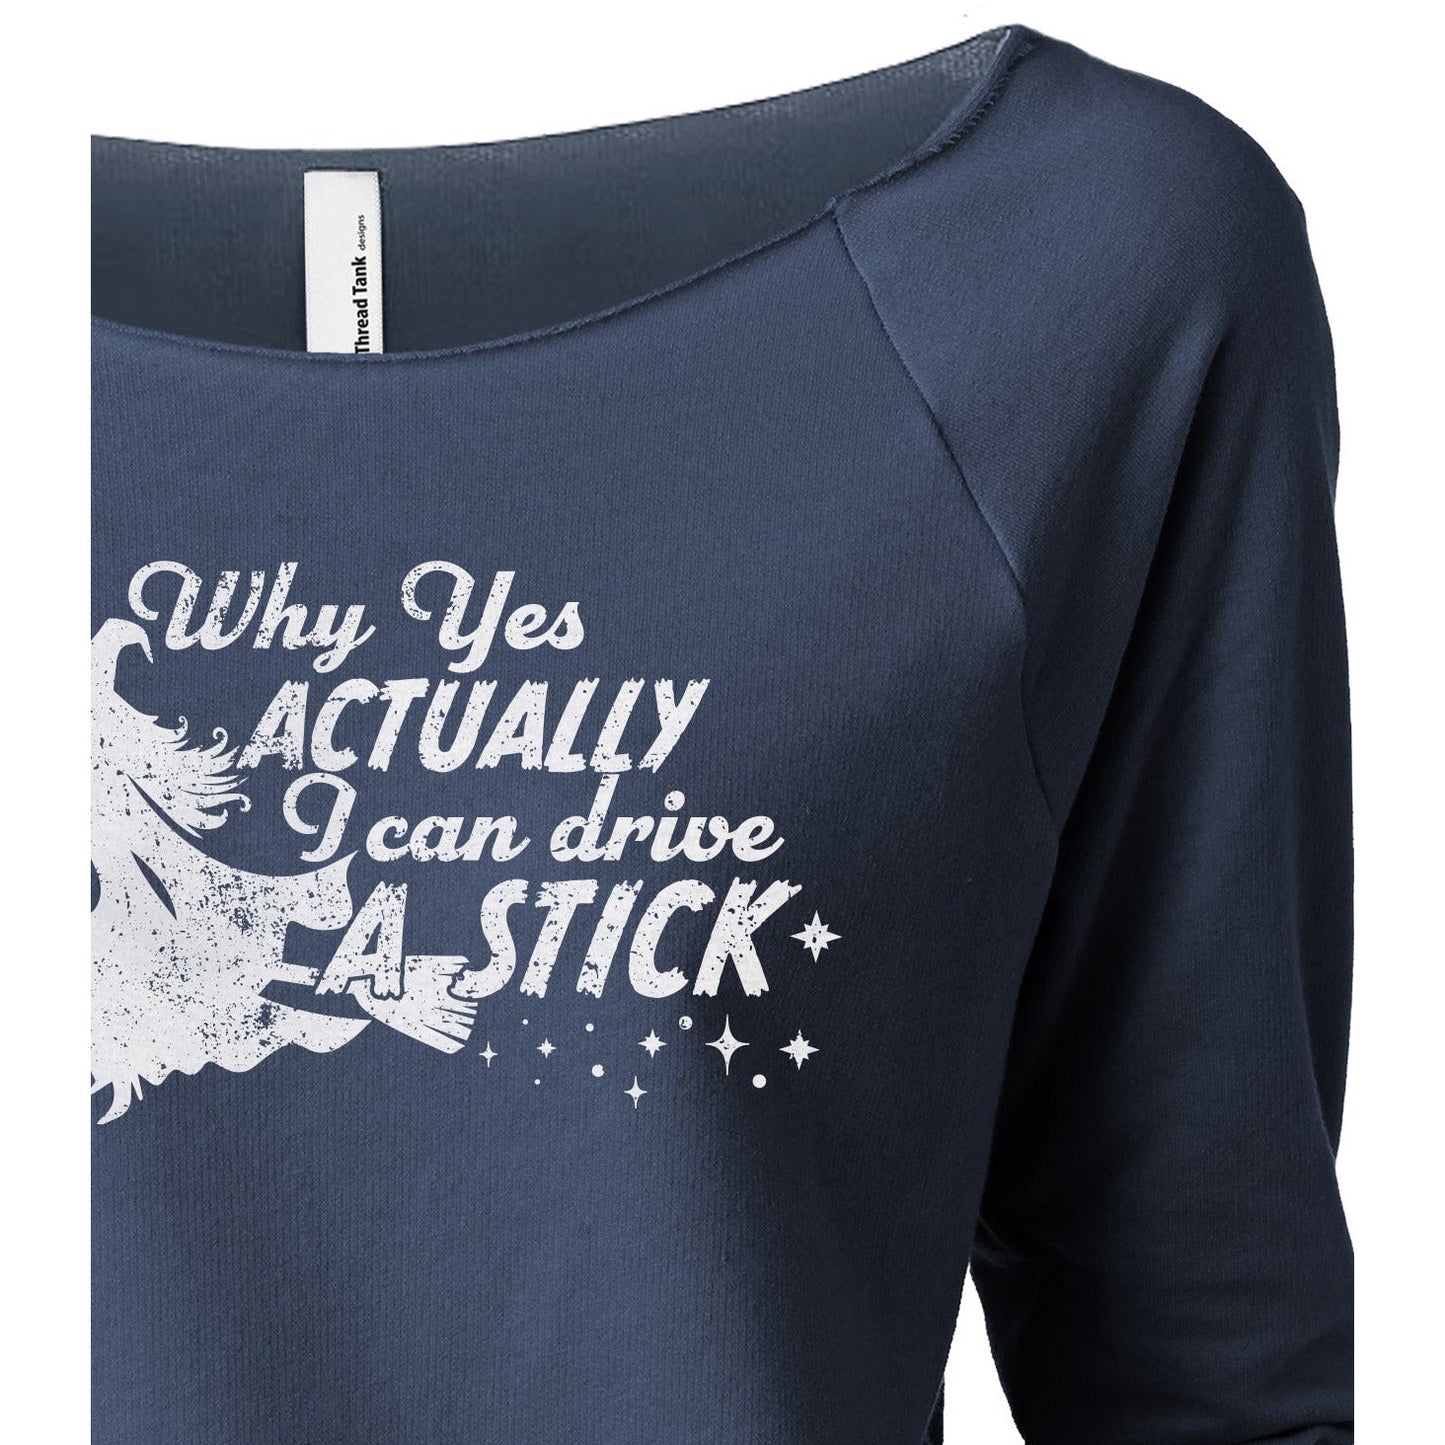 Why Yes Actually I Can Drive A Stick - Stories You Can Wear